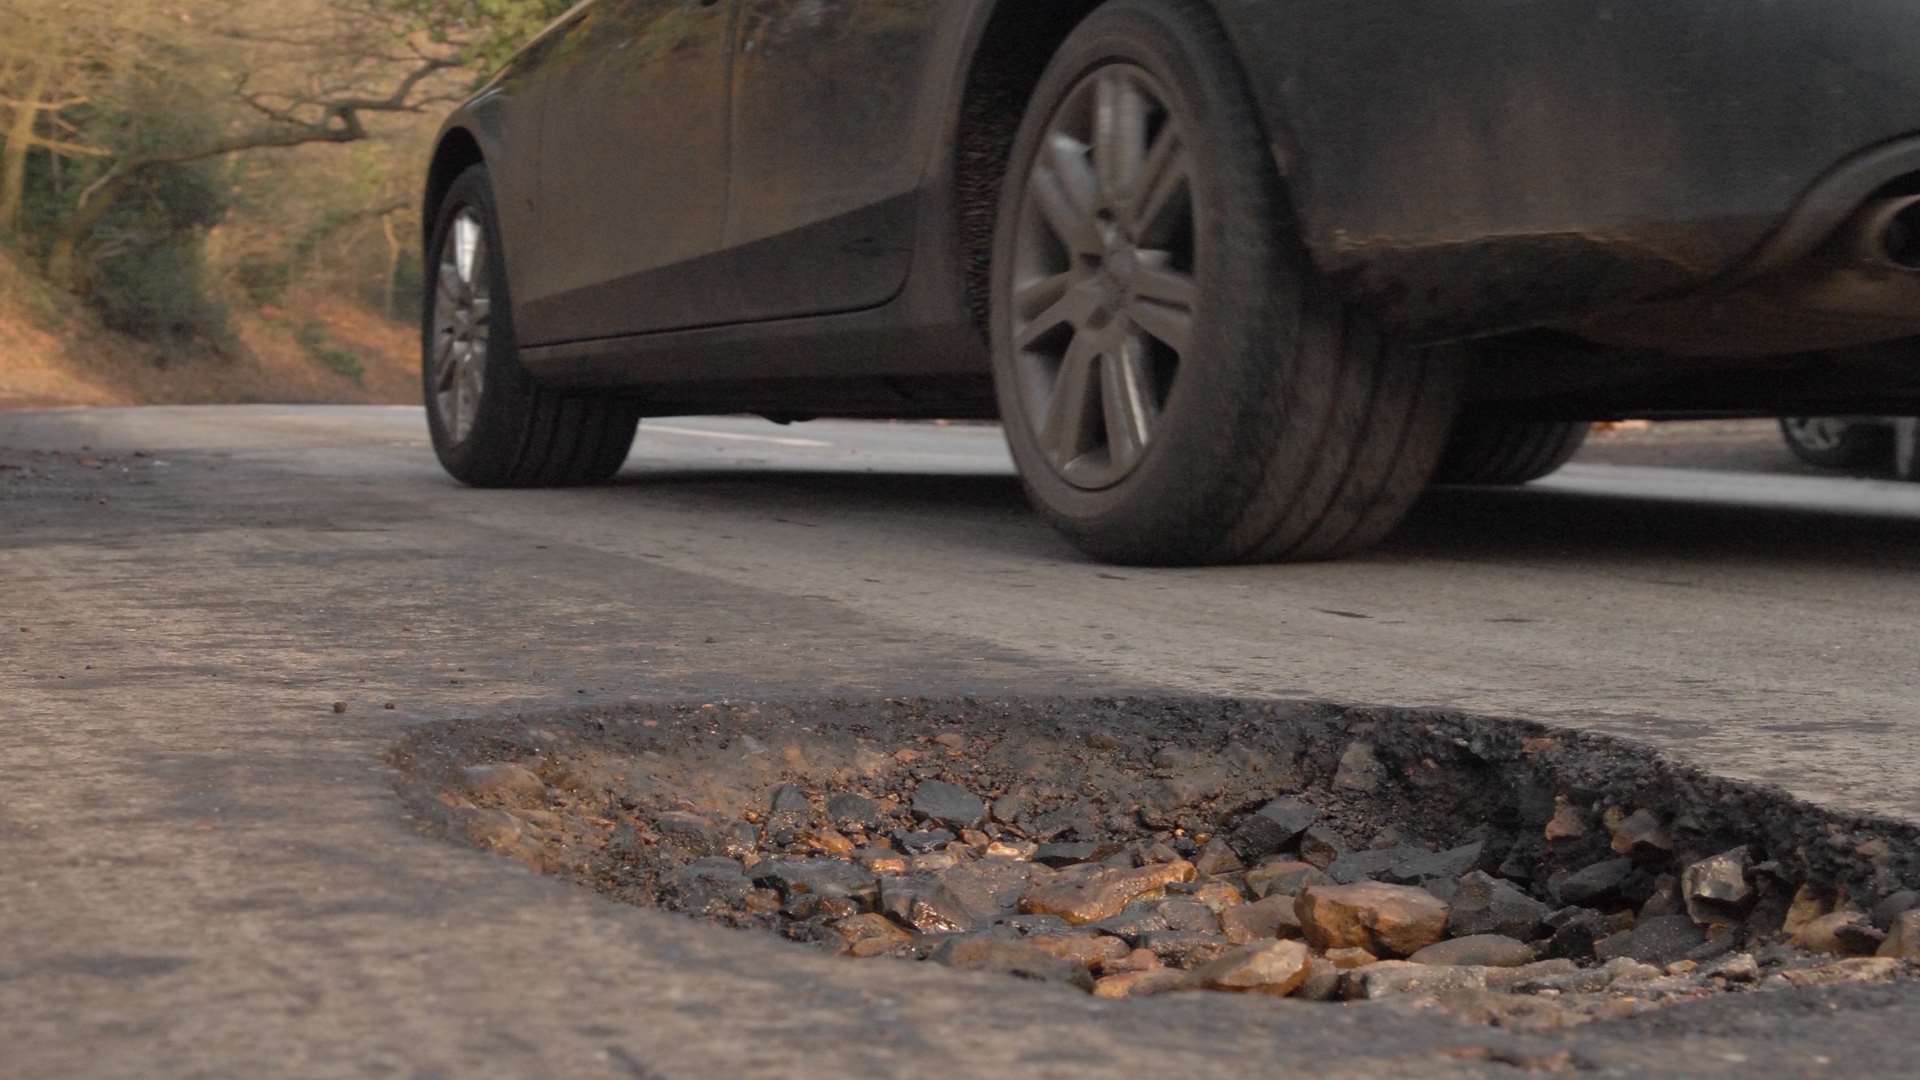 Potholes are an issue in Kent